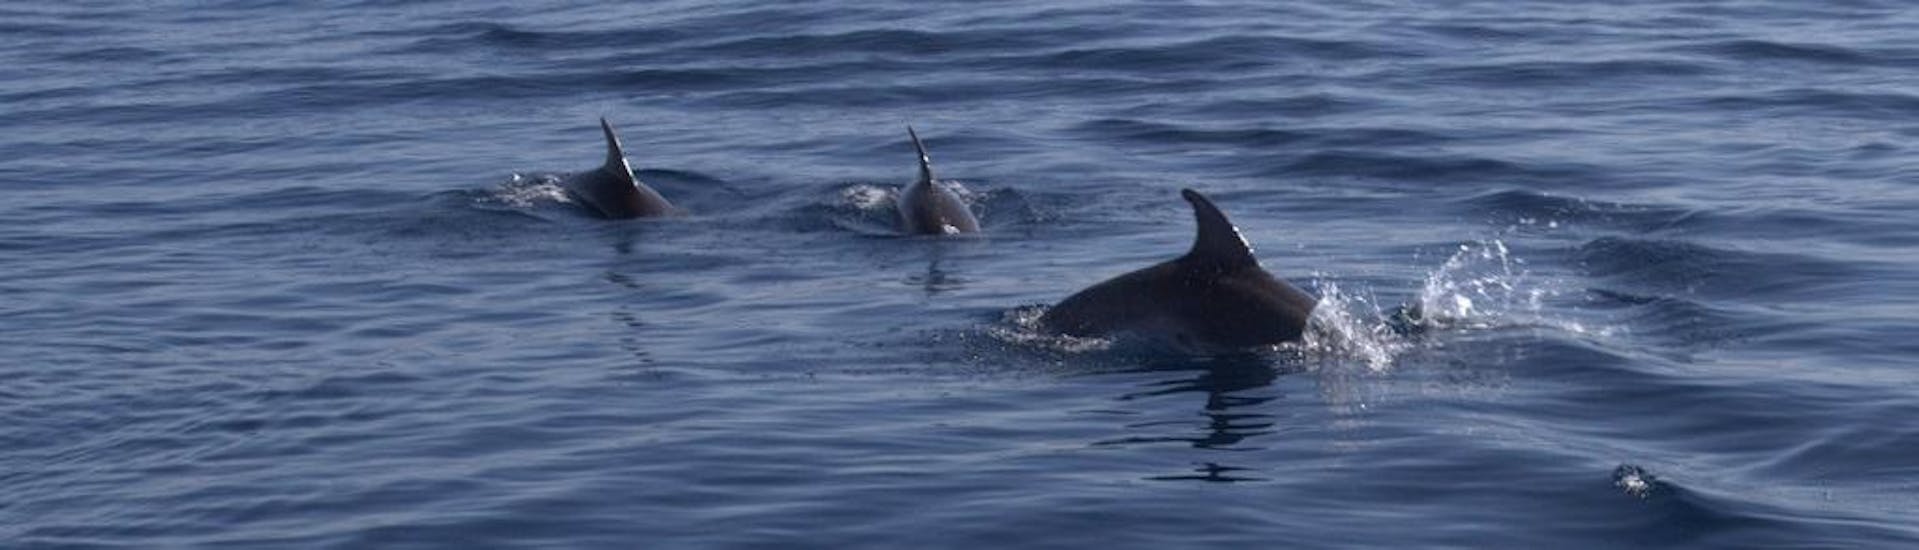 A family of dolphins is spotted during the Dolphin Watching at Capo Figari with Snorkeling Stops Orso Diving Club Poltu Quatu.